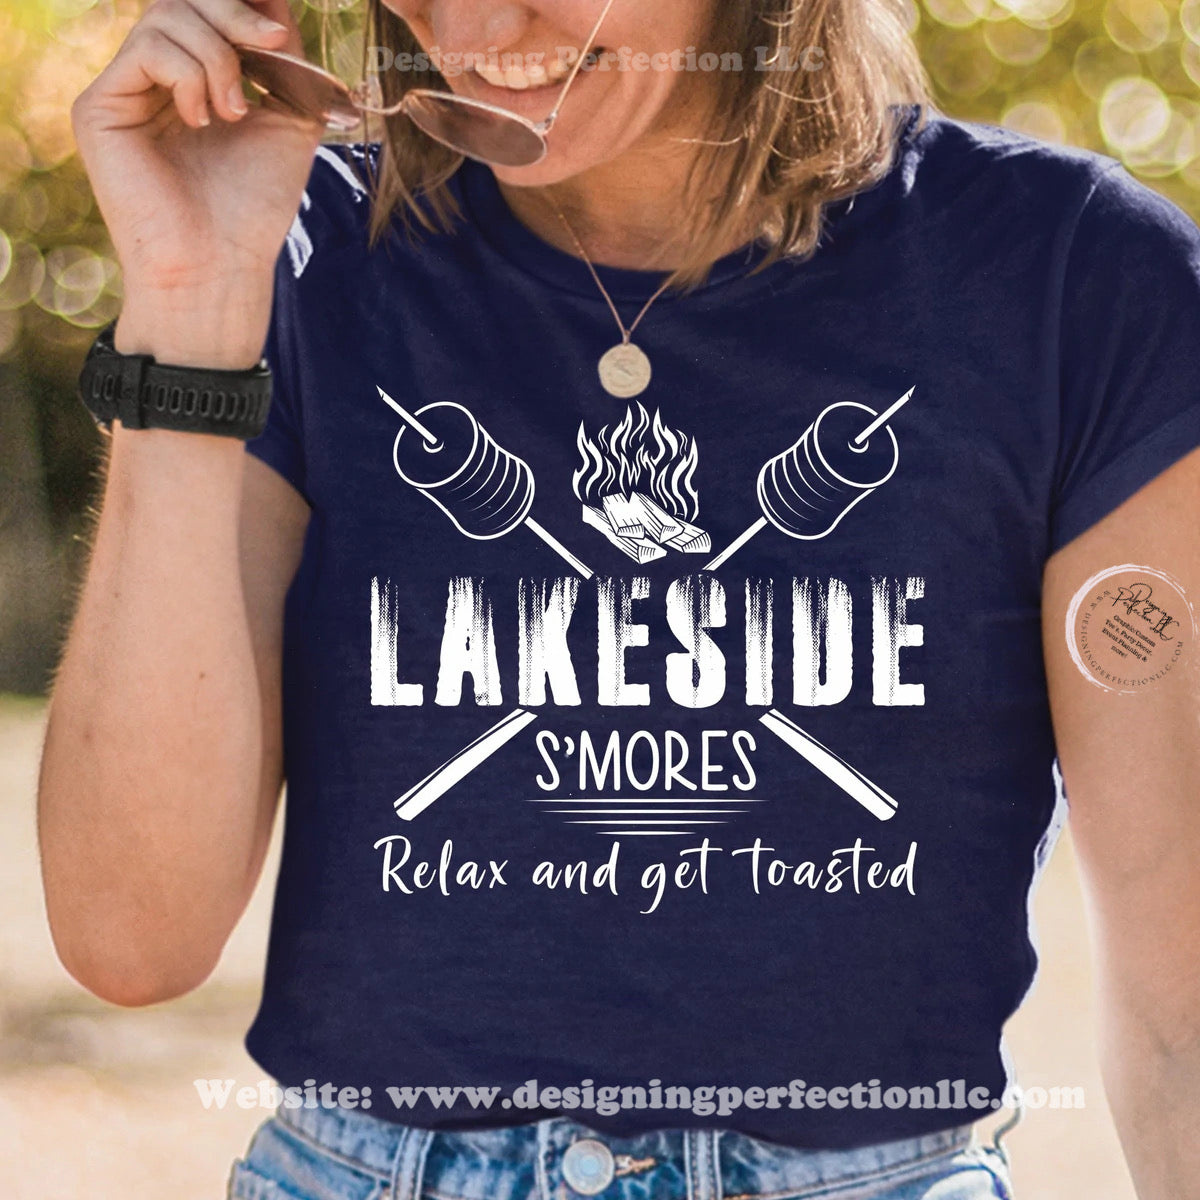 Lakeside s’mores (12)